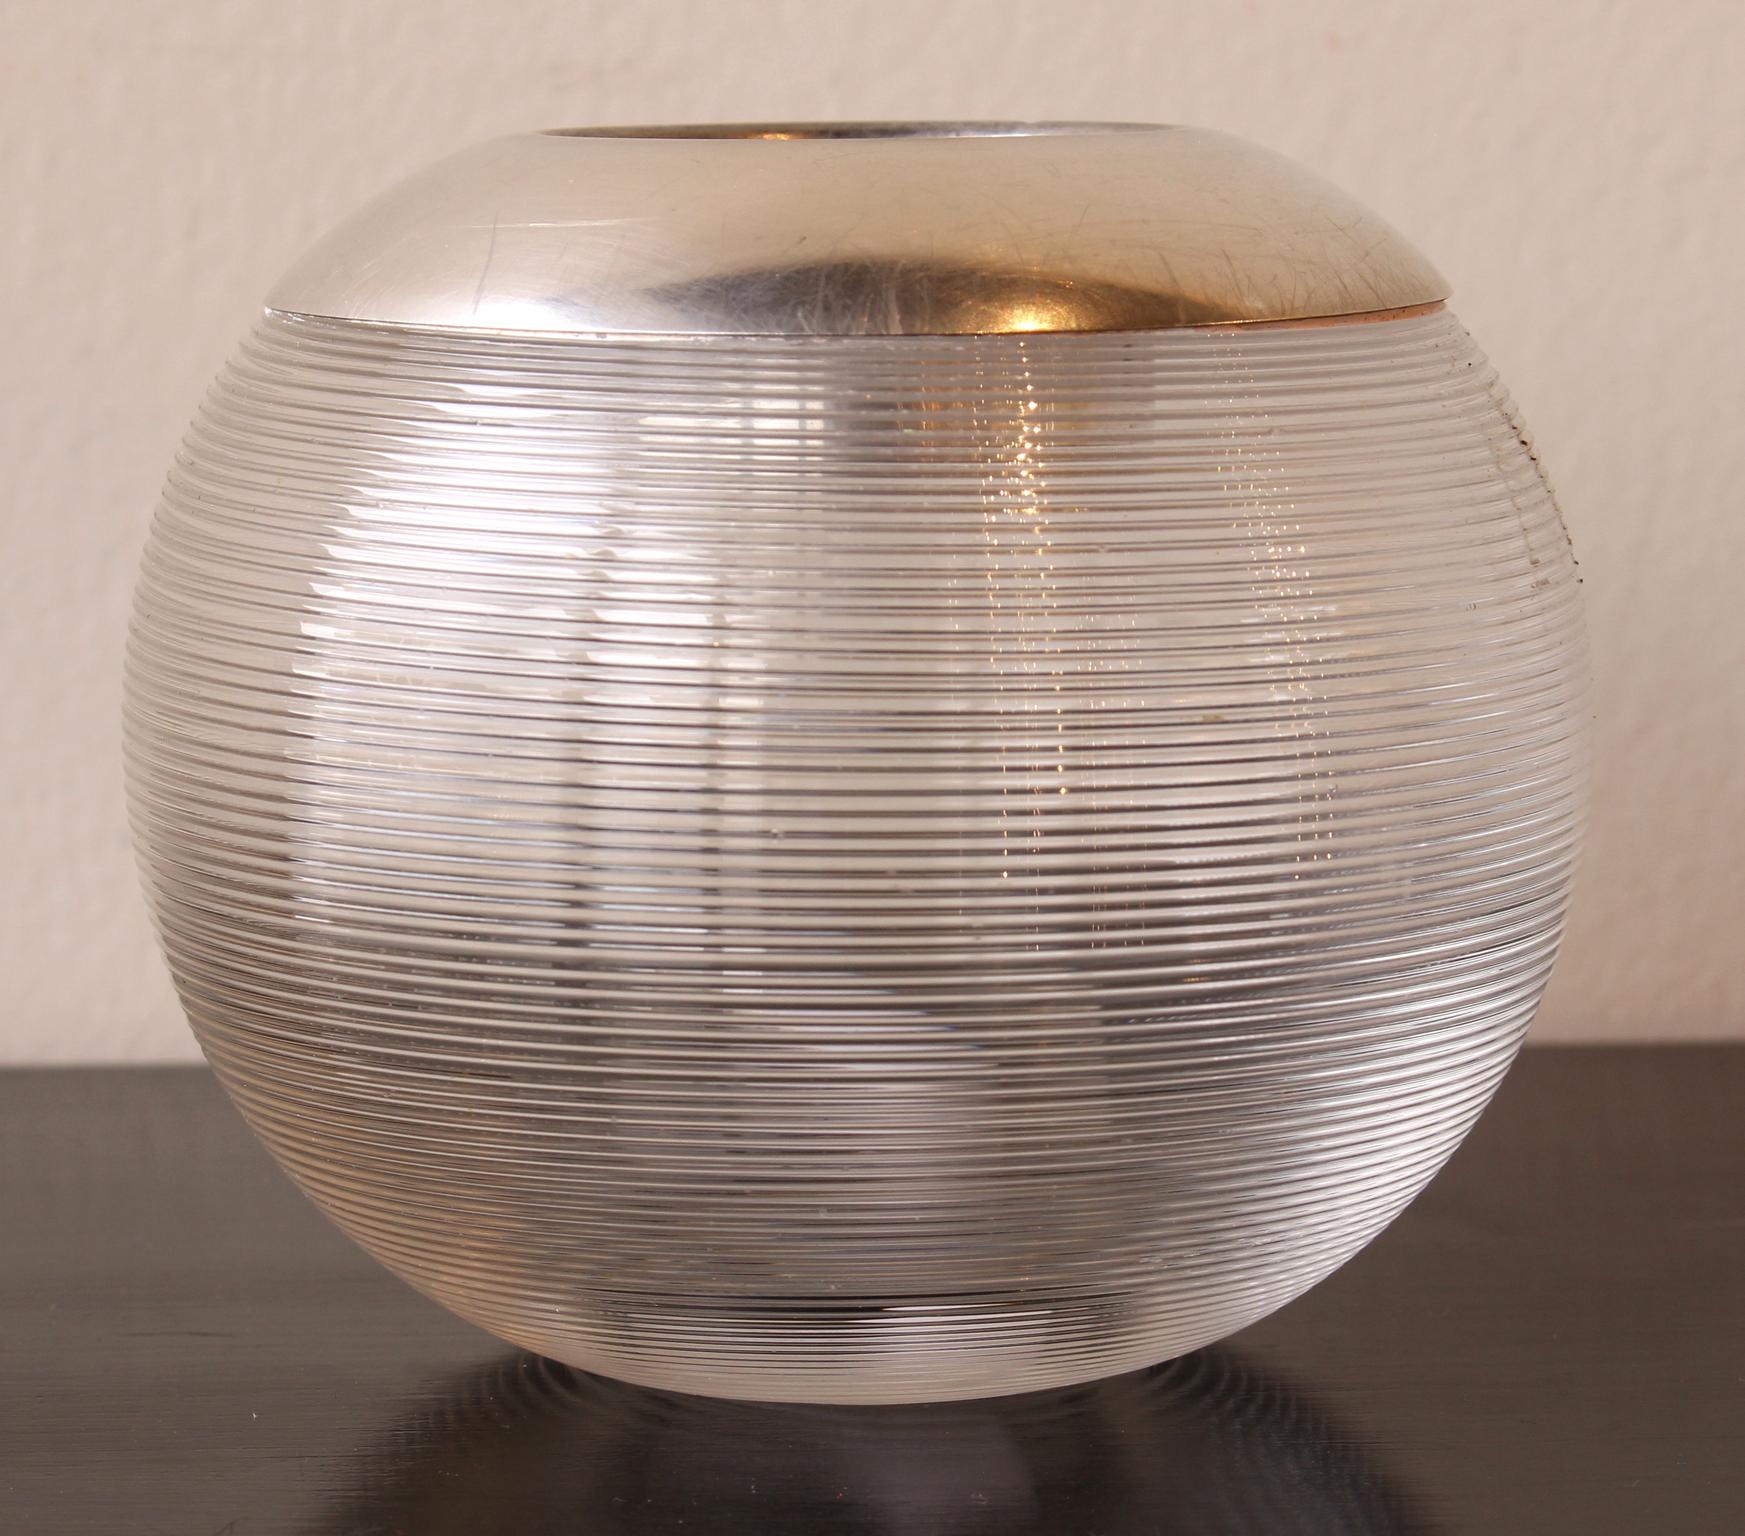 An exceptionally large ribbed glass and sterling silver match striker made by Asprey & Co, London, dated 1908.